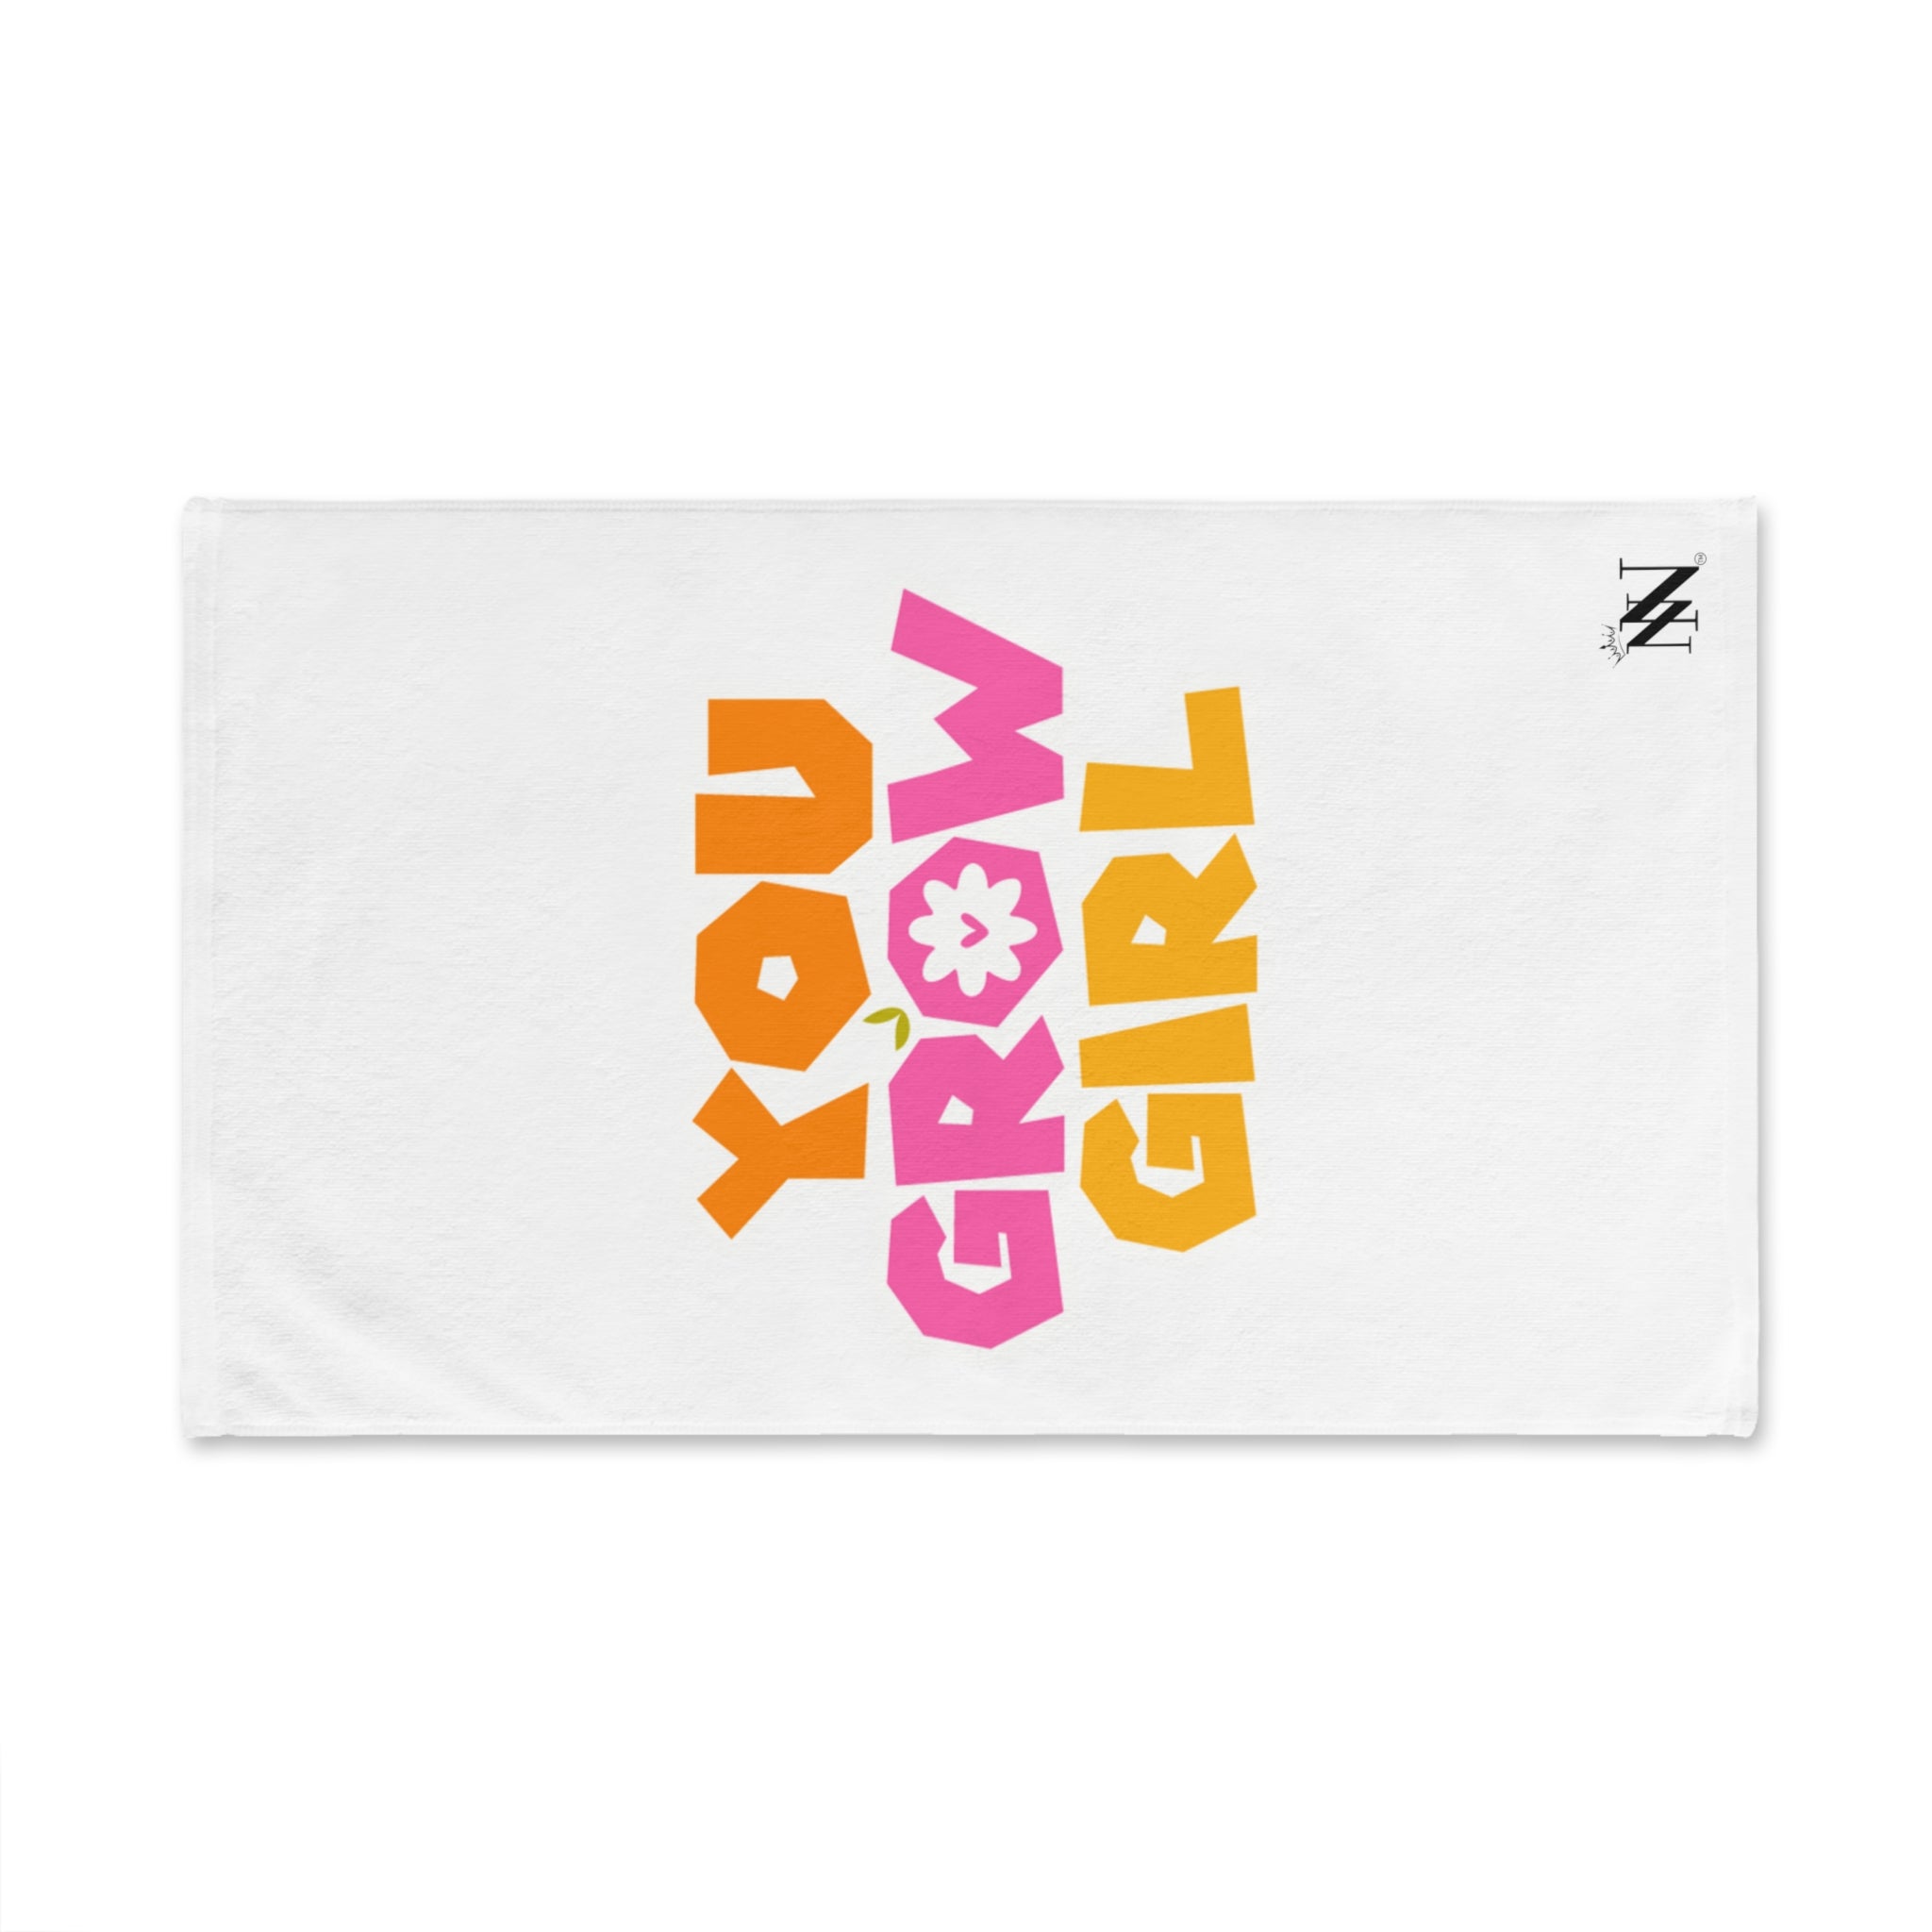 You Grow Girl White | Funny Gifts for Men - Gifts for Him - Birthday Gifts for Men, Him, Her, Husband, Boyfriend, Girlfriend, New Couple Gifts, Fathers & Valentines Day Gifts, Christmas Gifts NECTAR NAPKINS